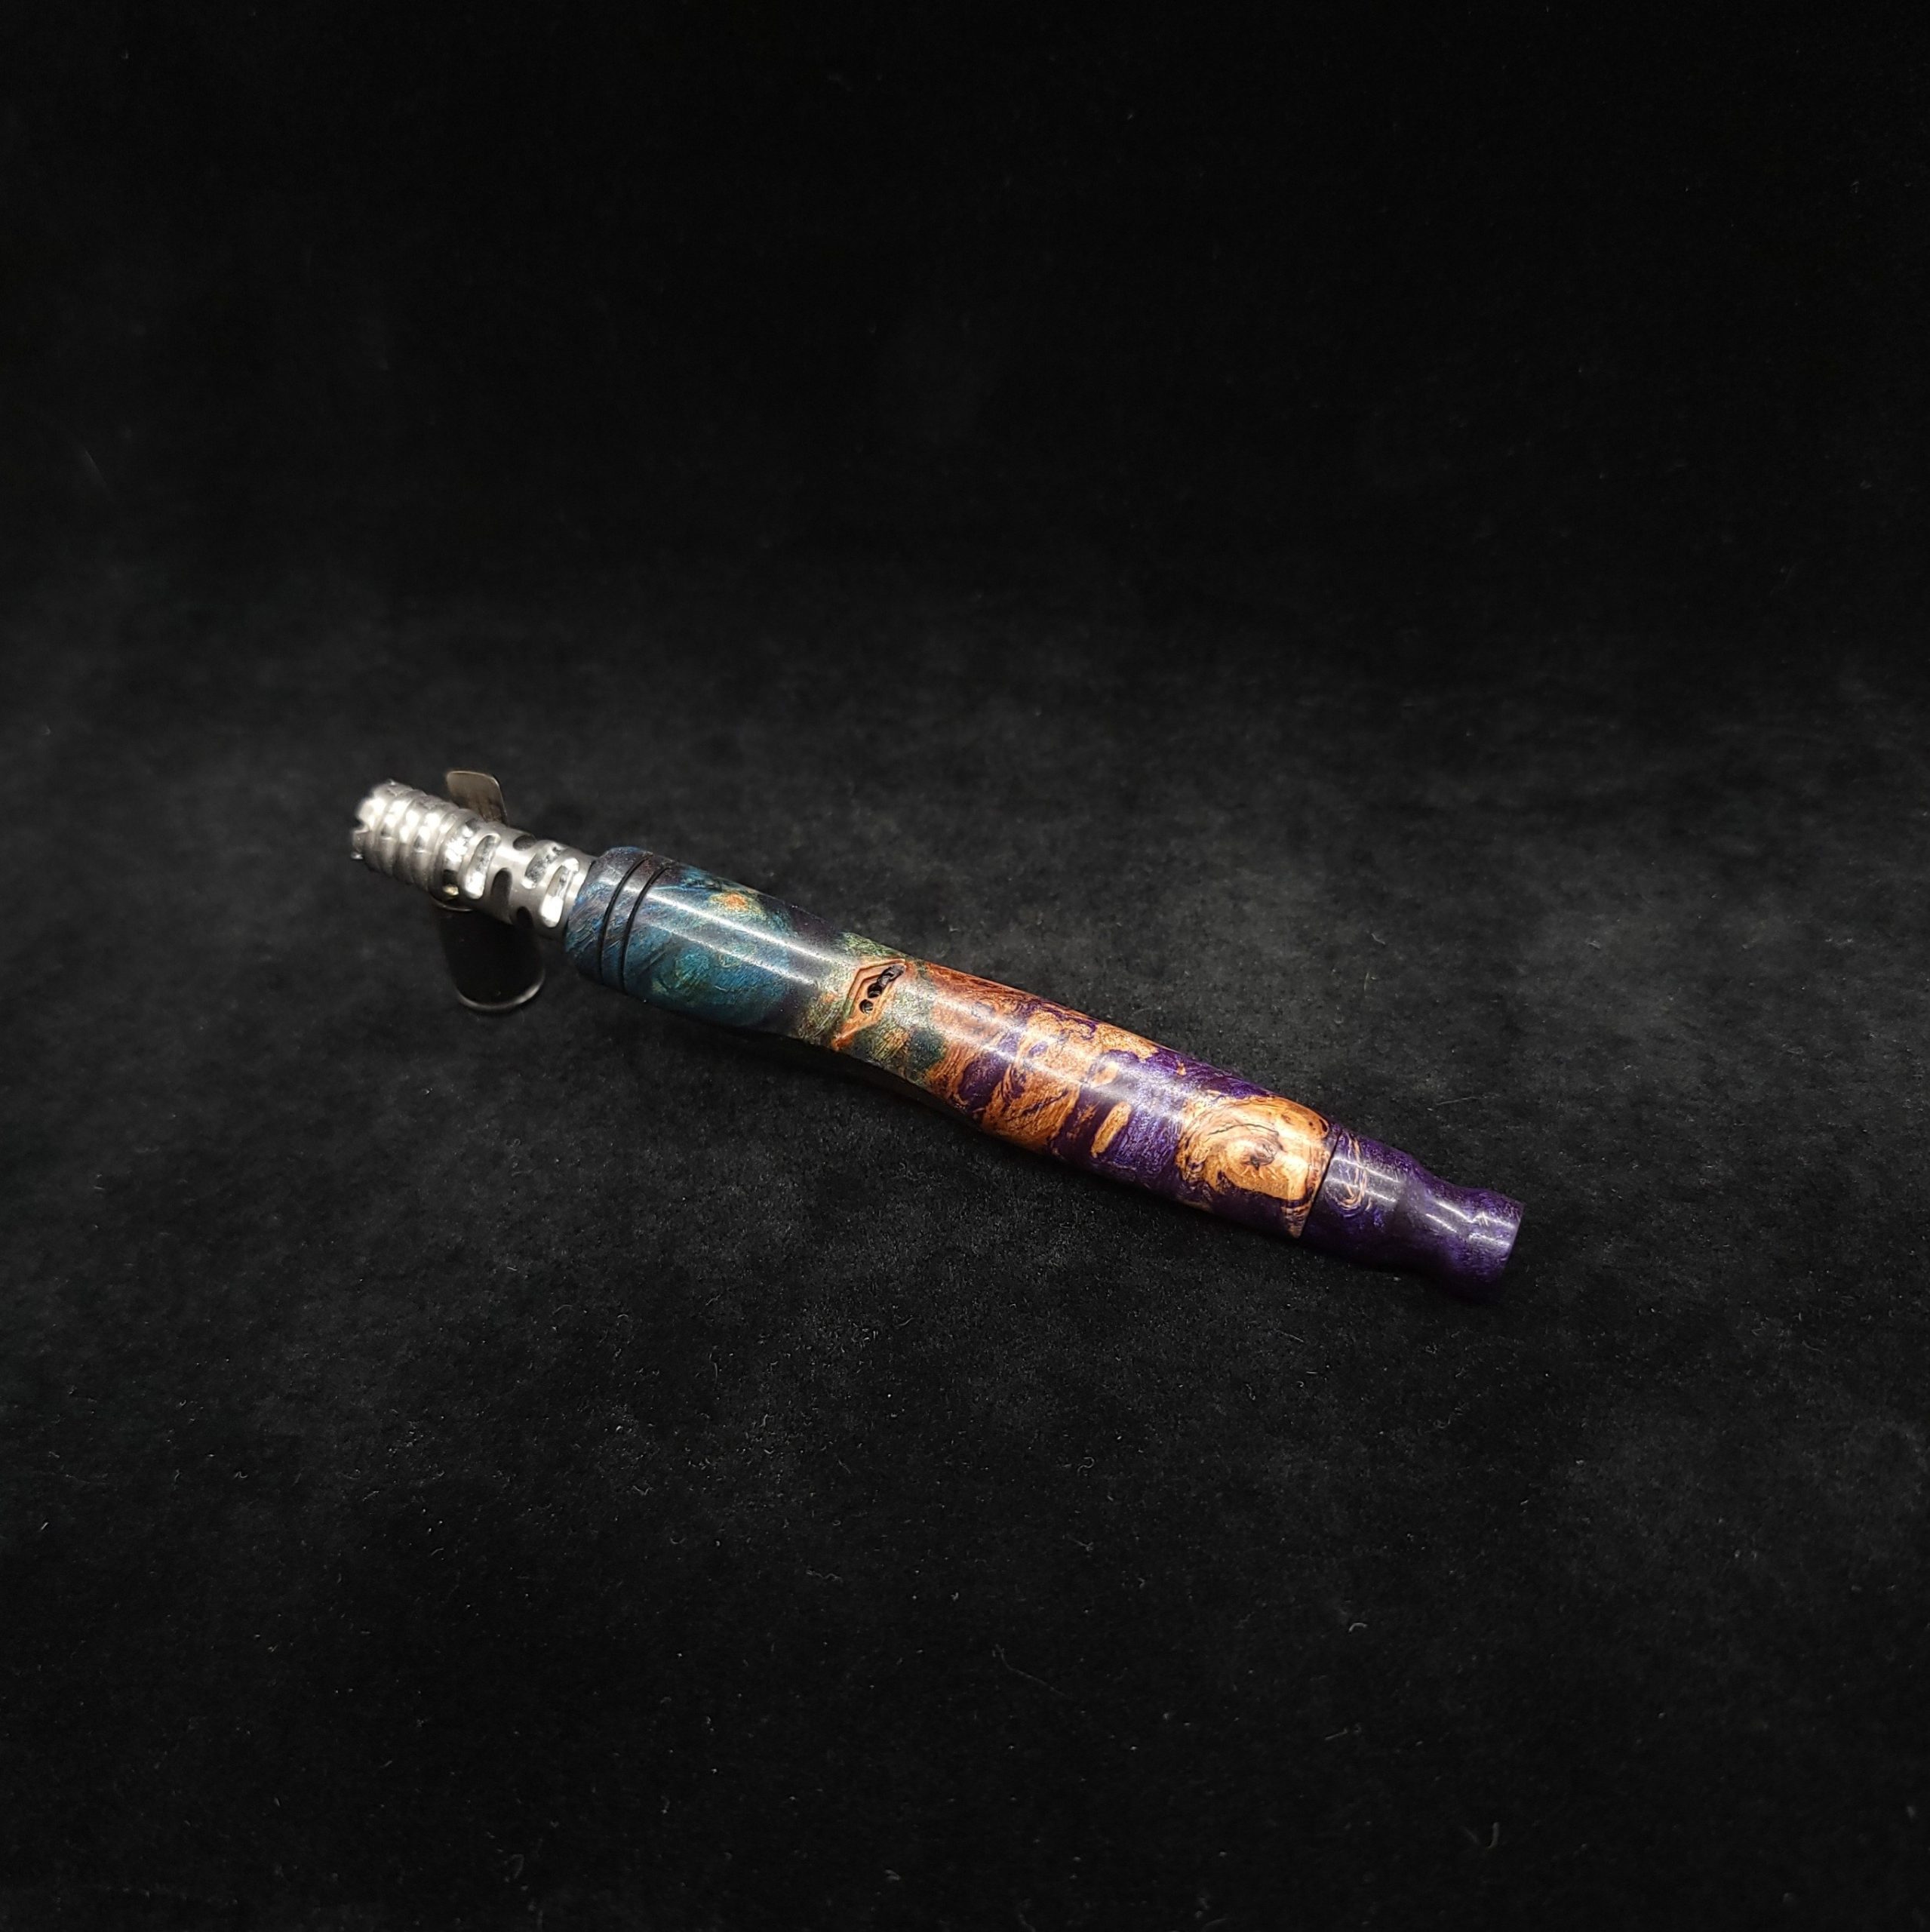 This image portrays Cosmic Burl-High Class XL Dynavap Stem + Matching Mouthpiece by Dovetail Woodwork.